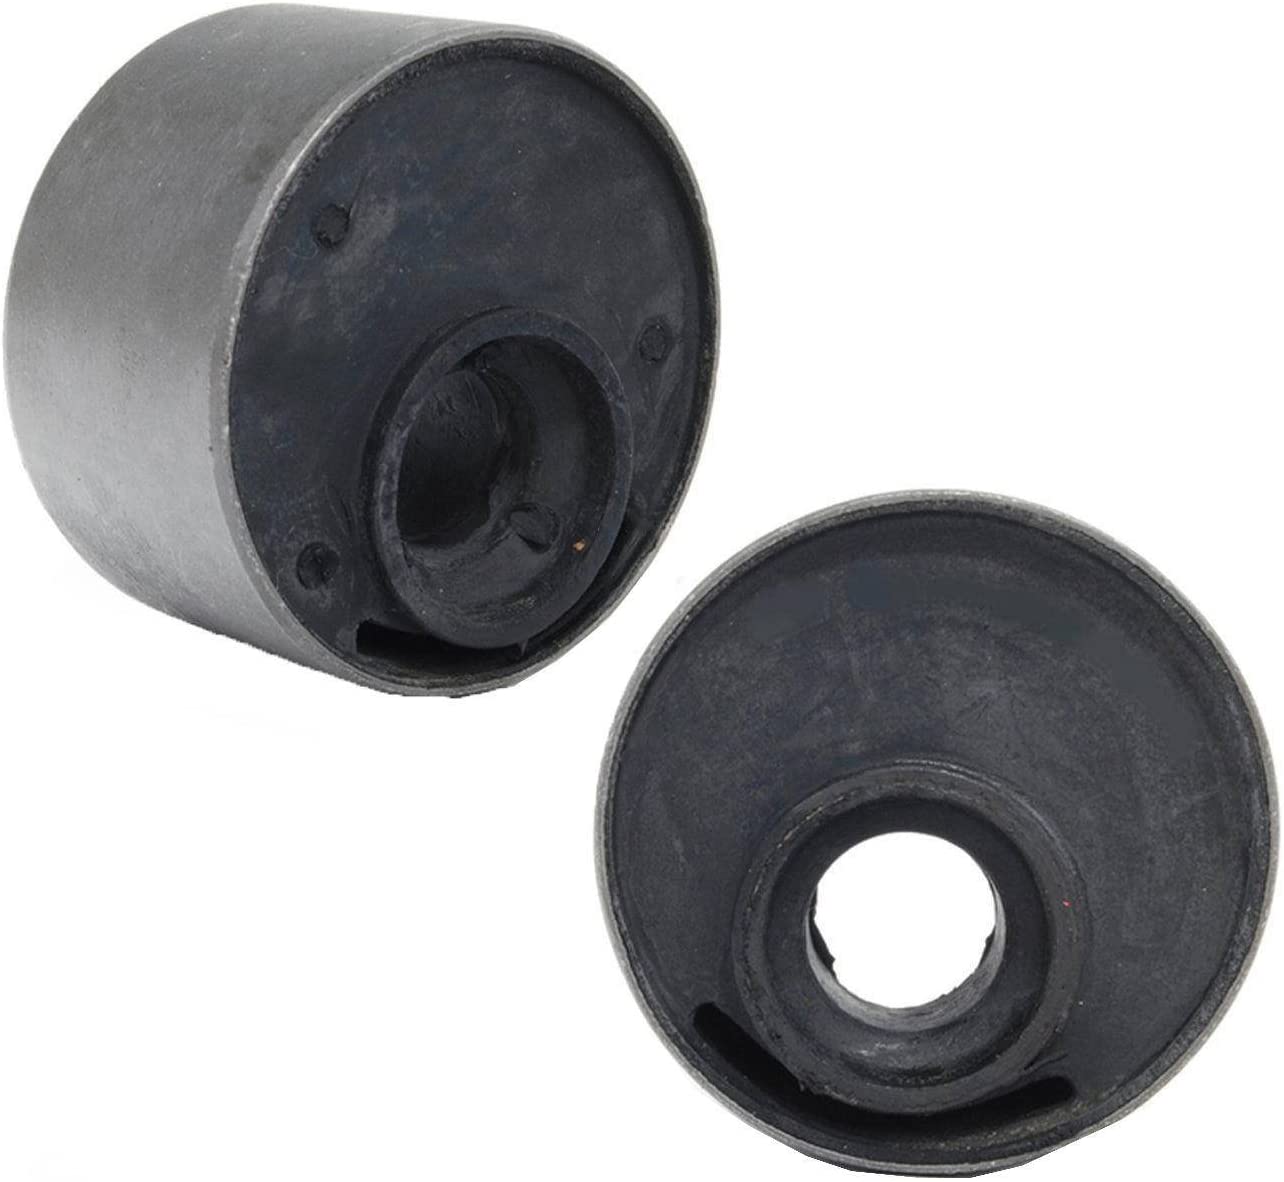 Bapmic 31129064875 Front Lower Control Arm Bushing for BMW E36 (Pack of 2)